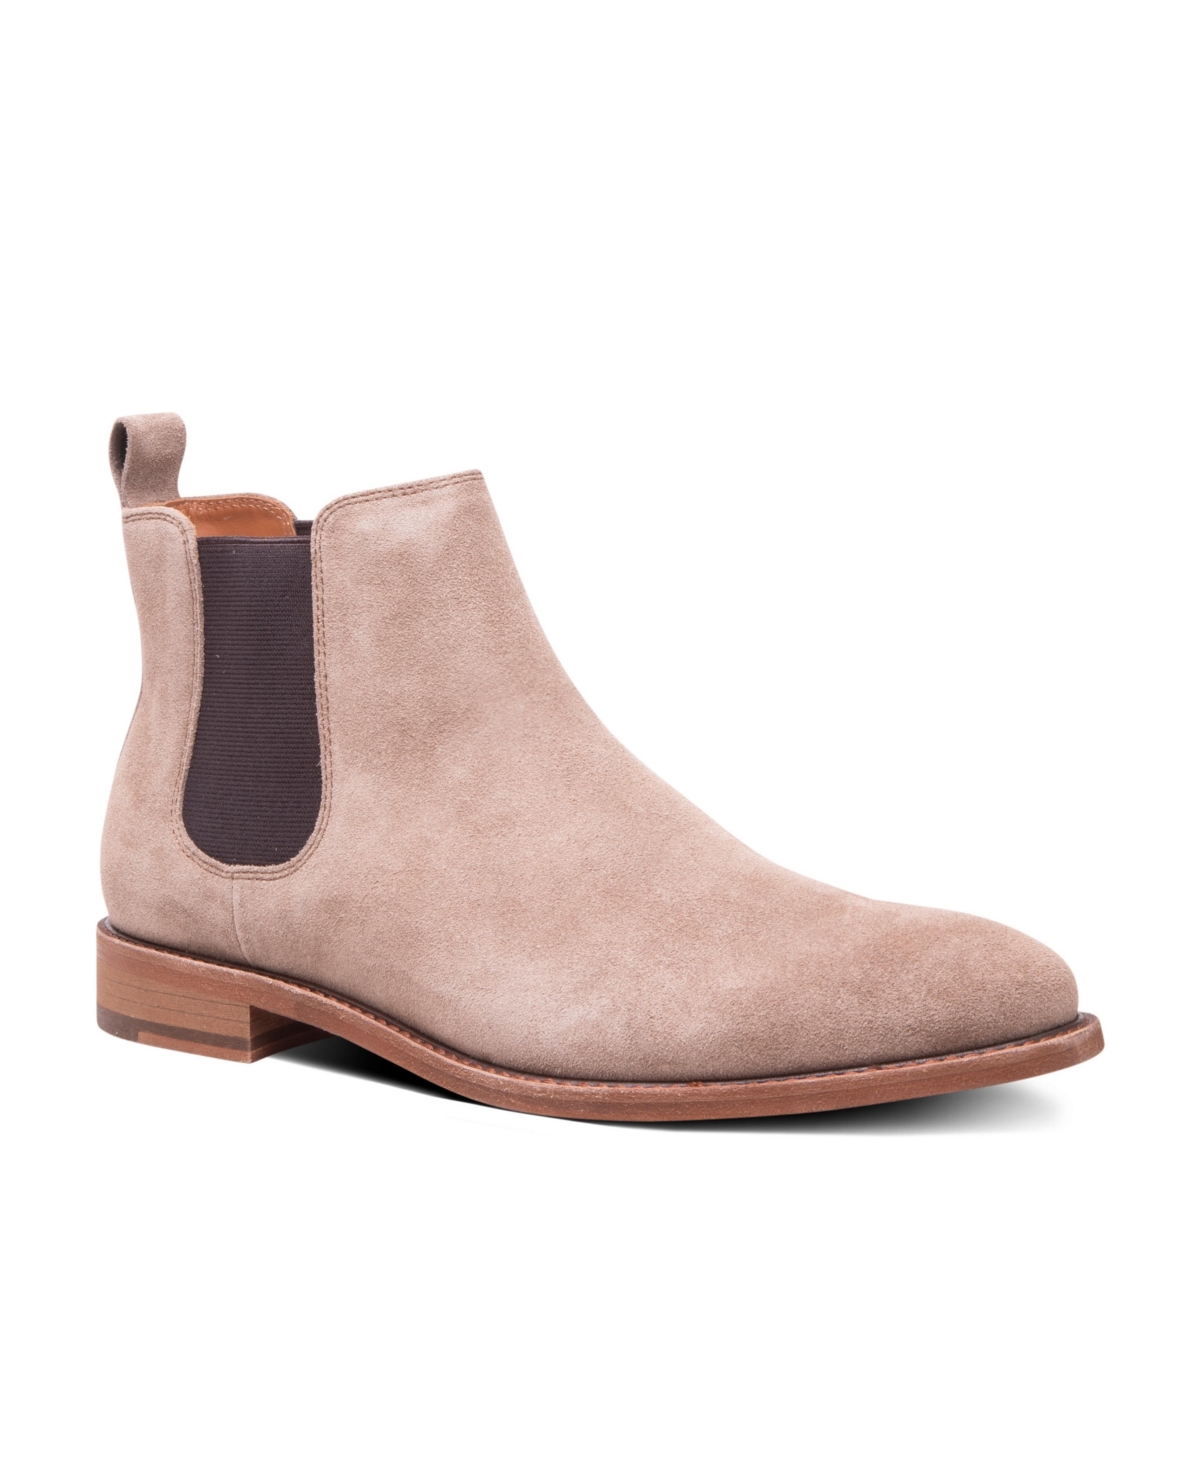 Men's Portland Dress Casual Chelsea Boots - Taupe